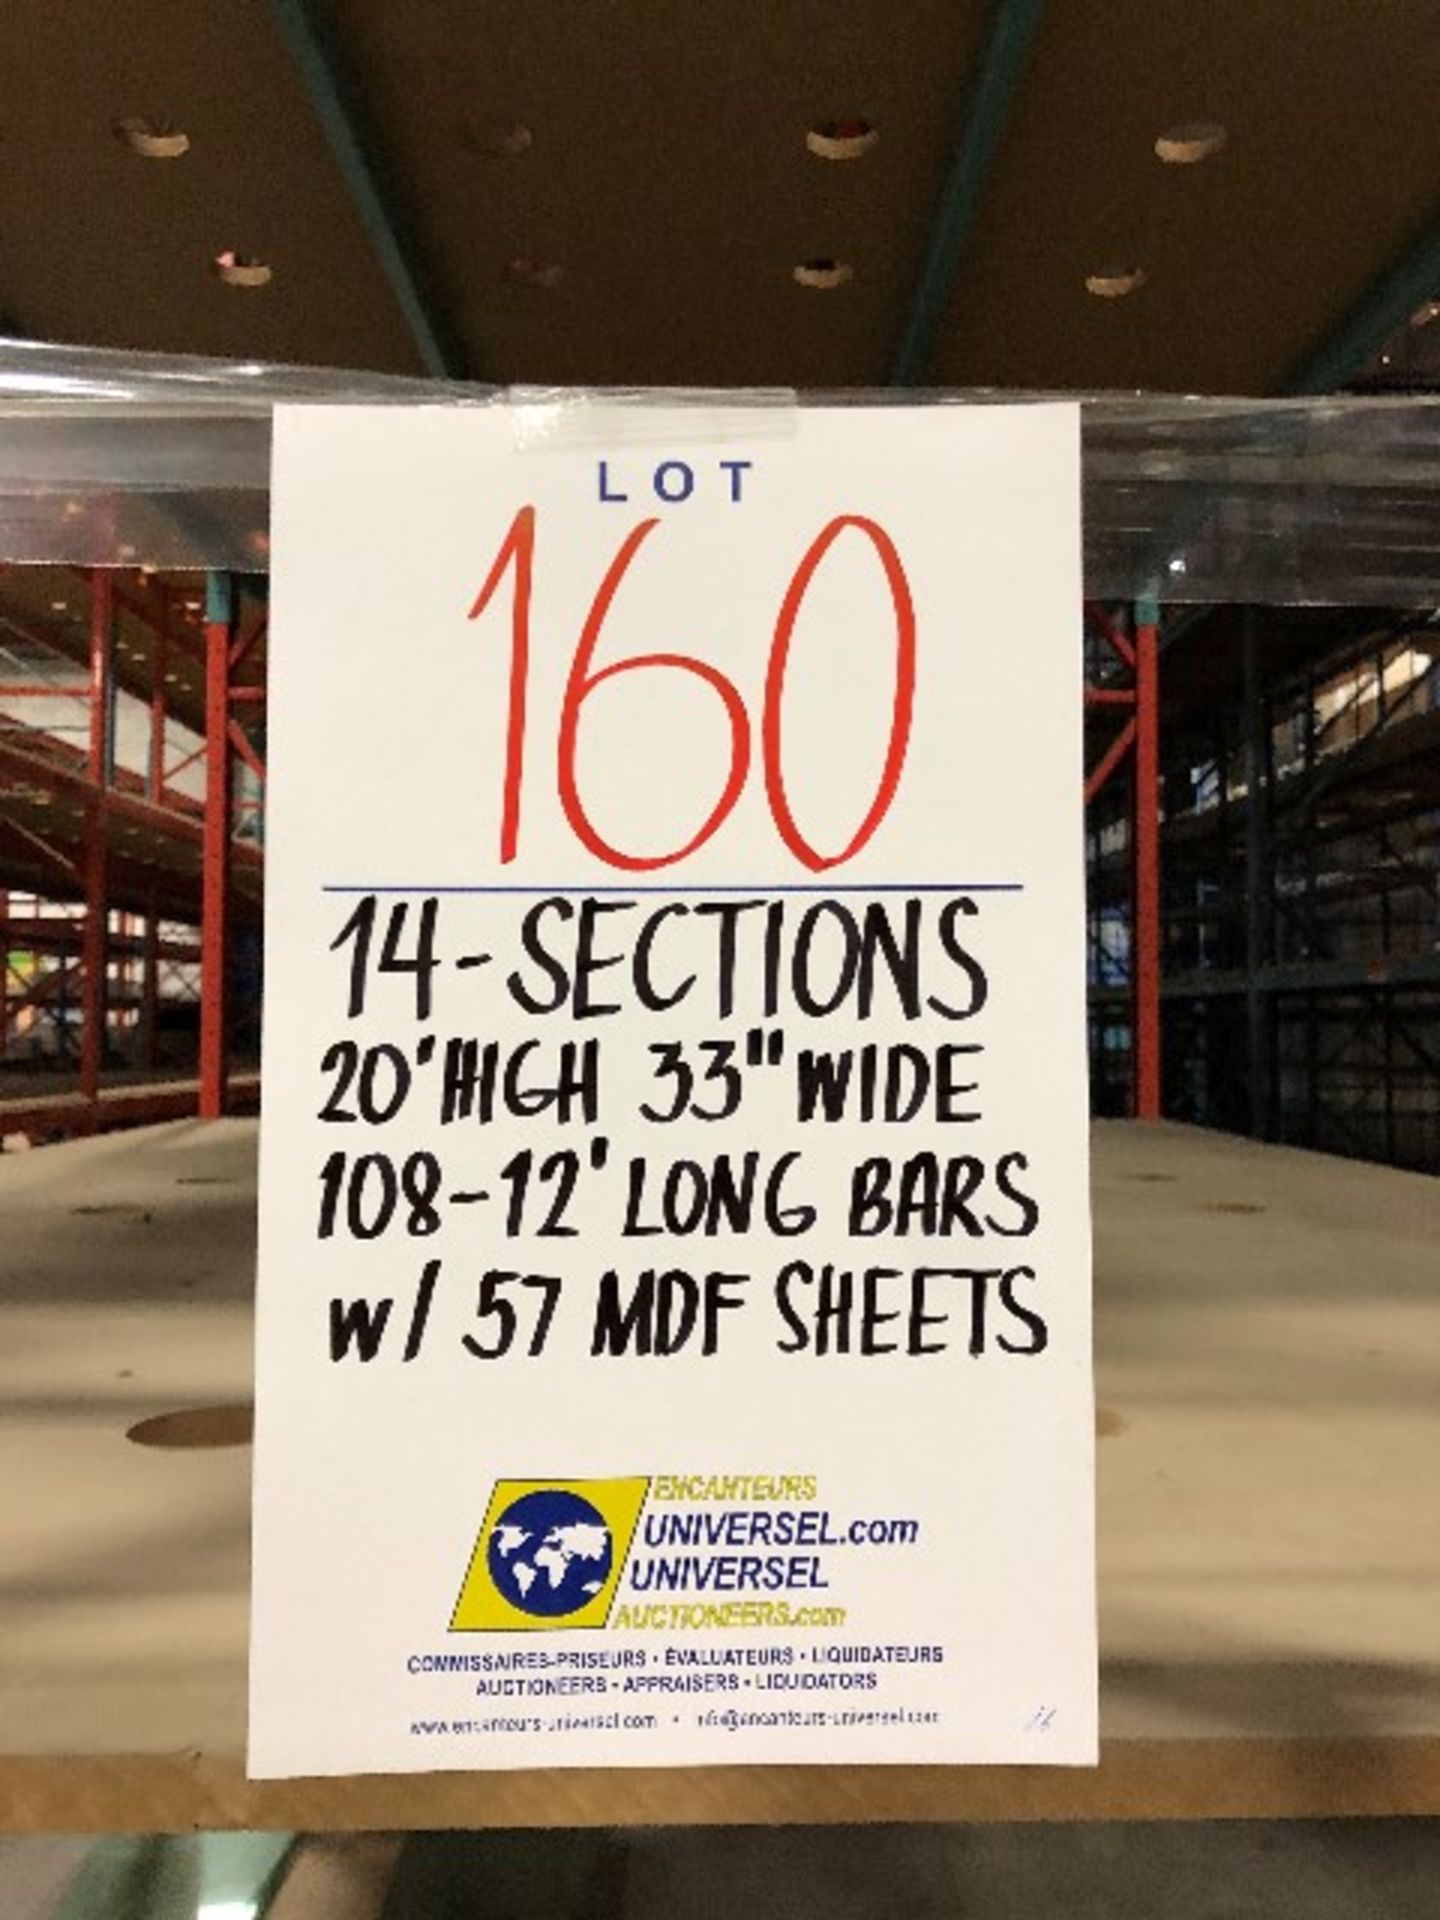 Pallet racking: H.20'xW.33”,108pcs 12'long bars w/57 MDF sheets,14 sections - Image 3 of 3